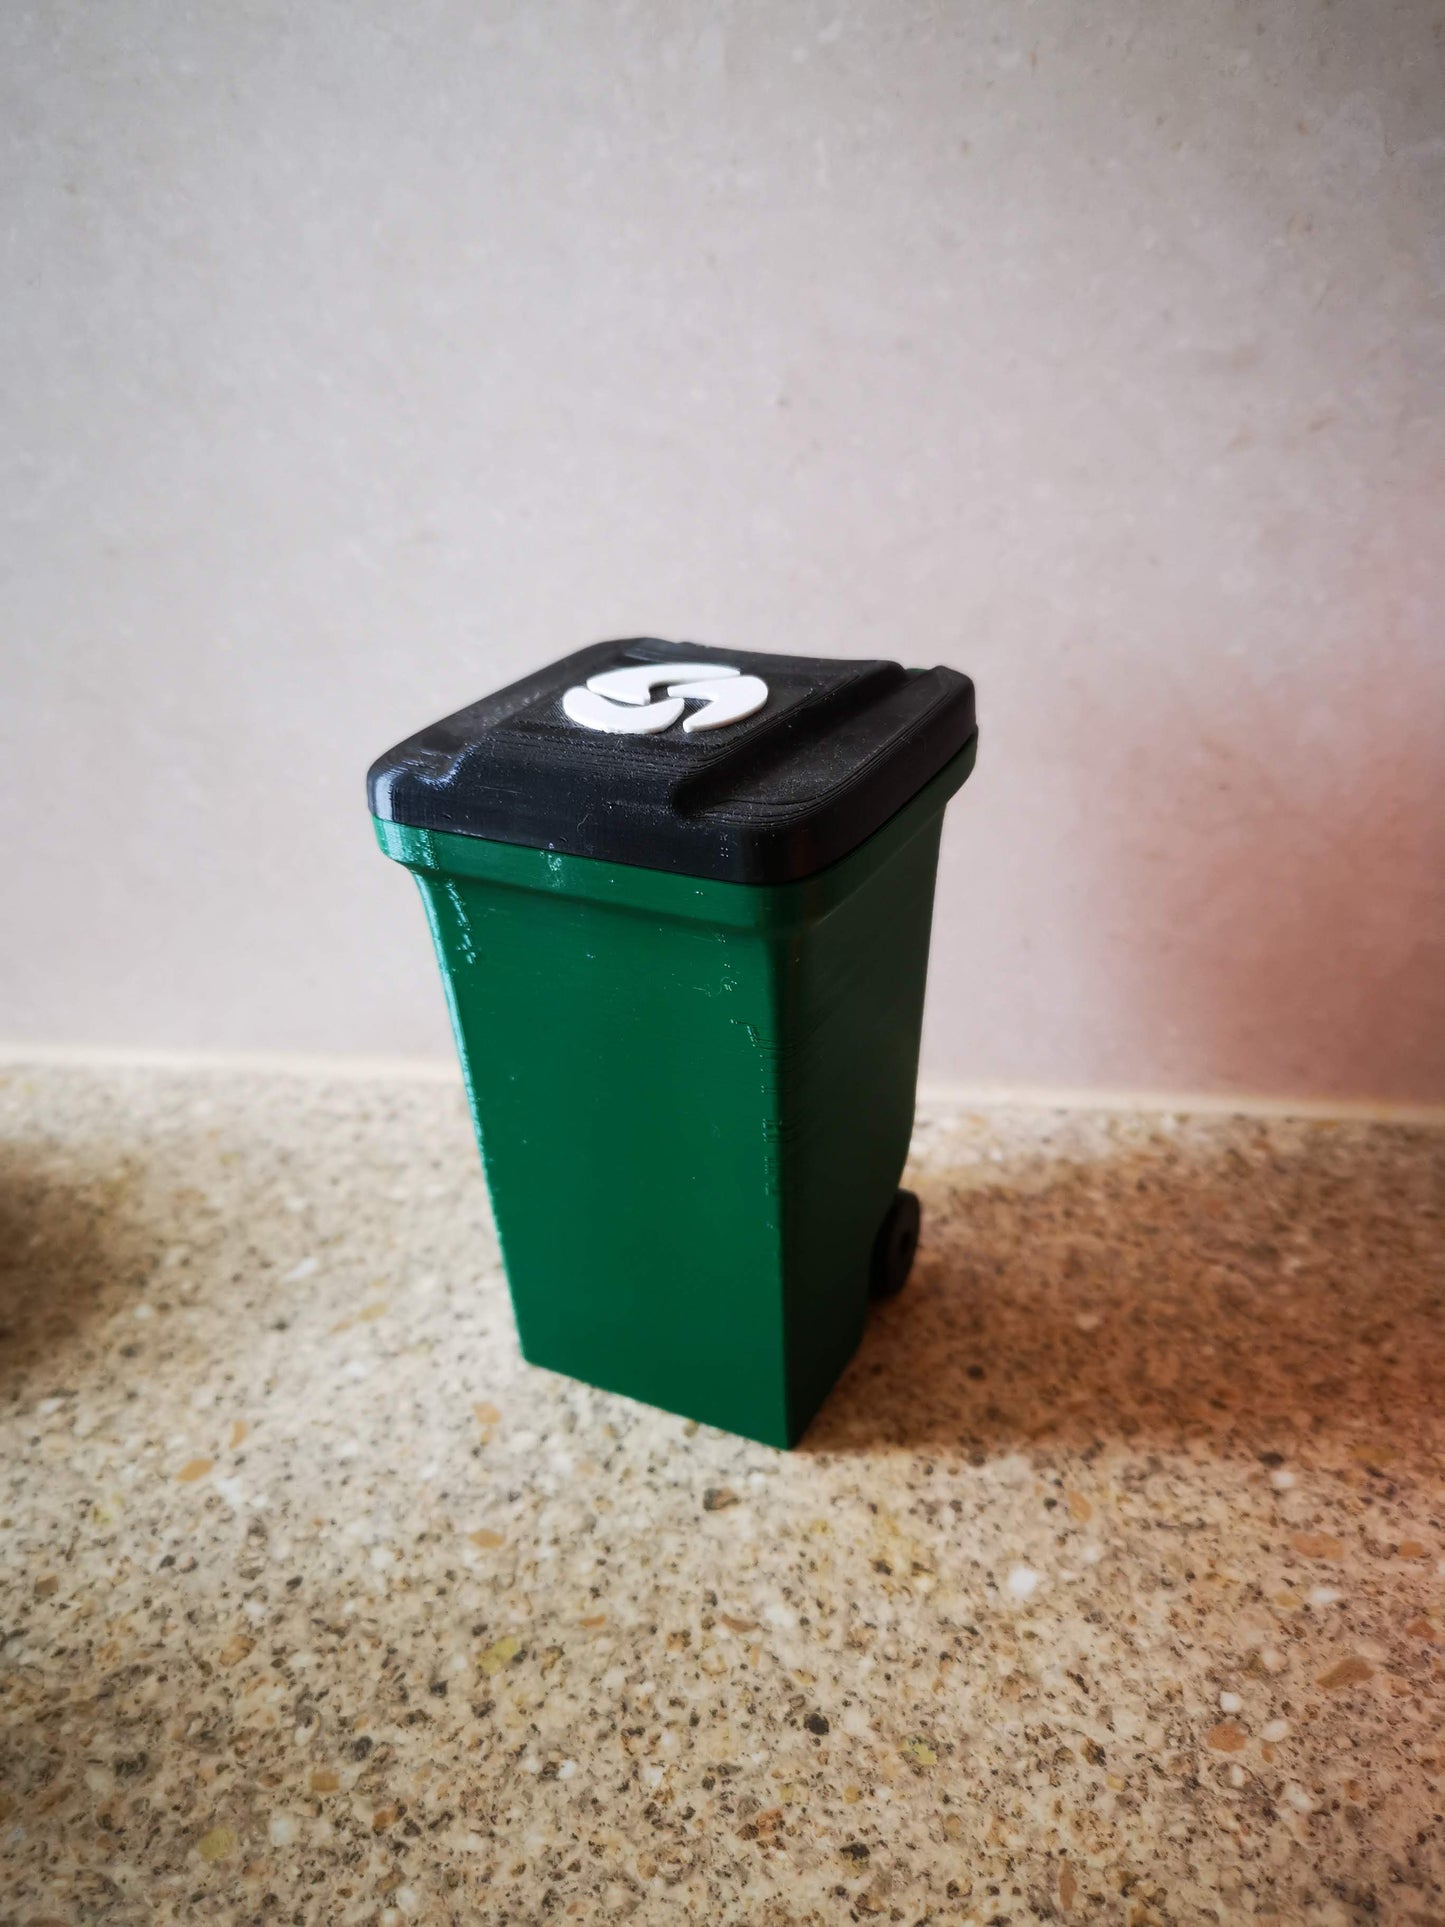 3D printed waste bin trash can from front side angle with lid closed